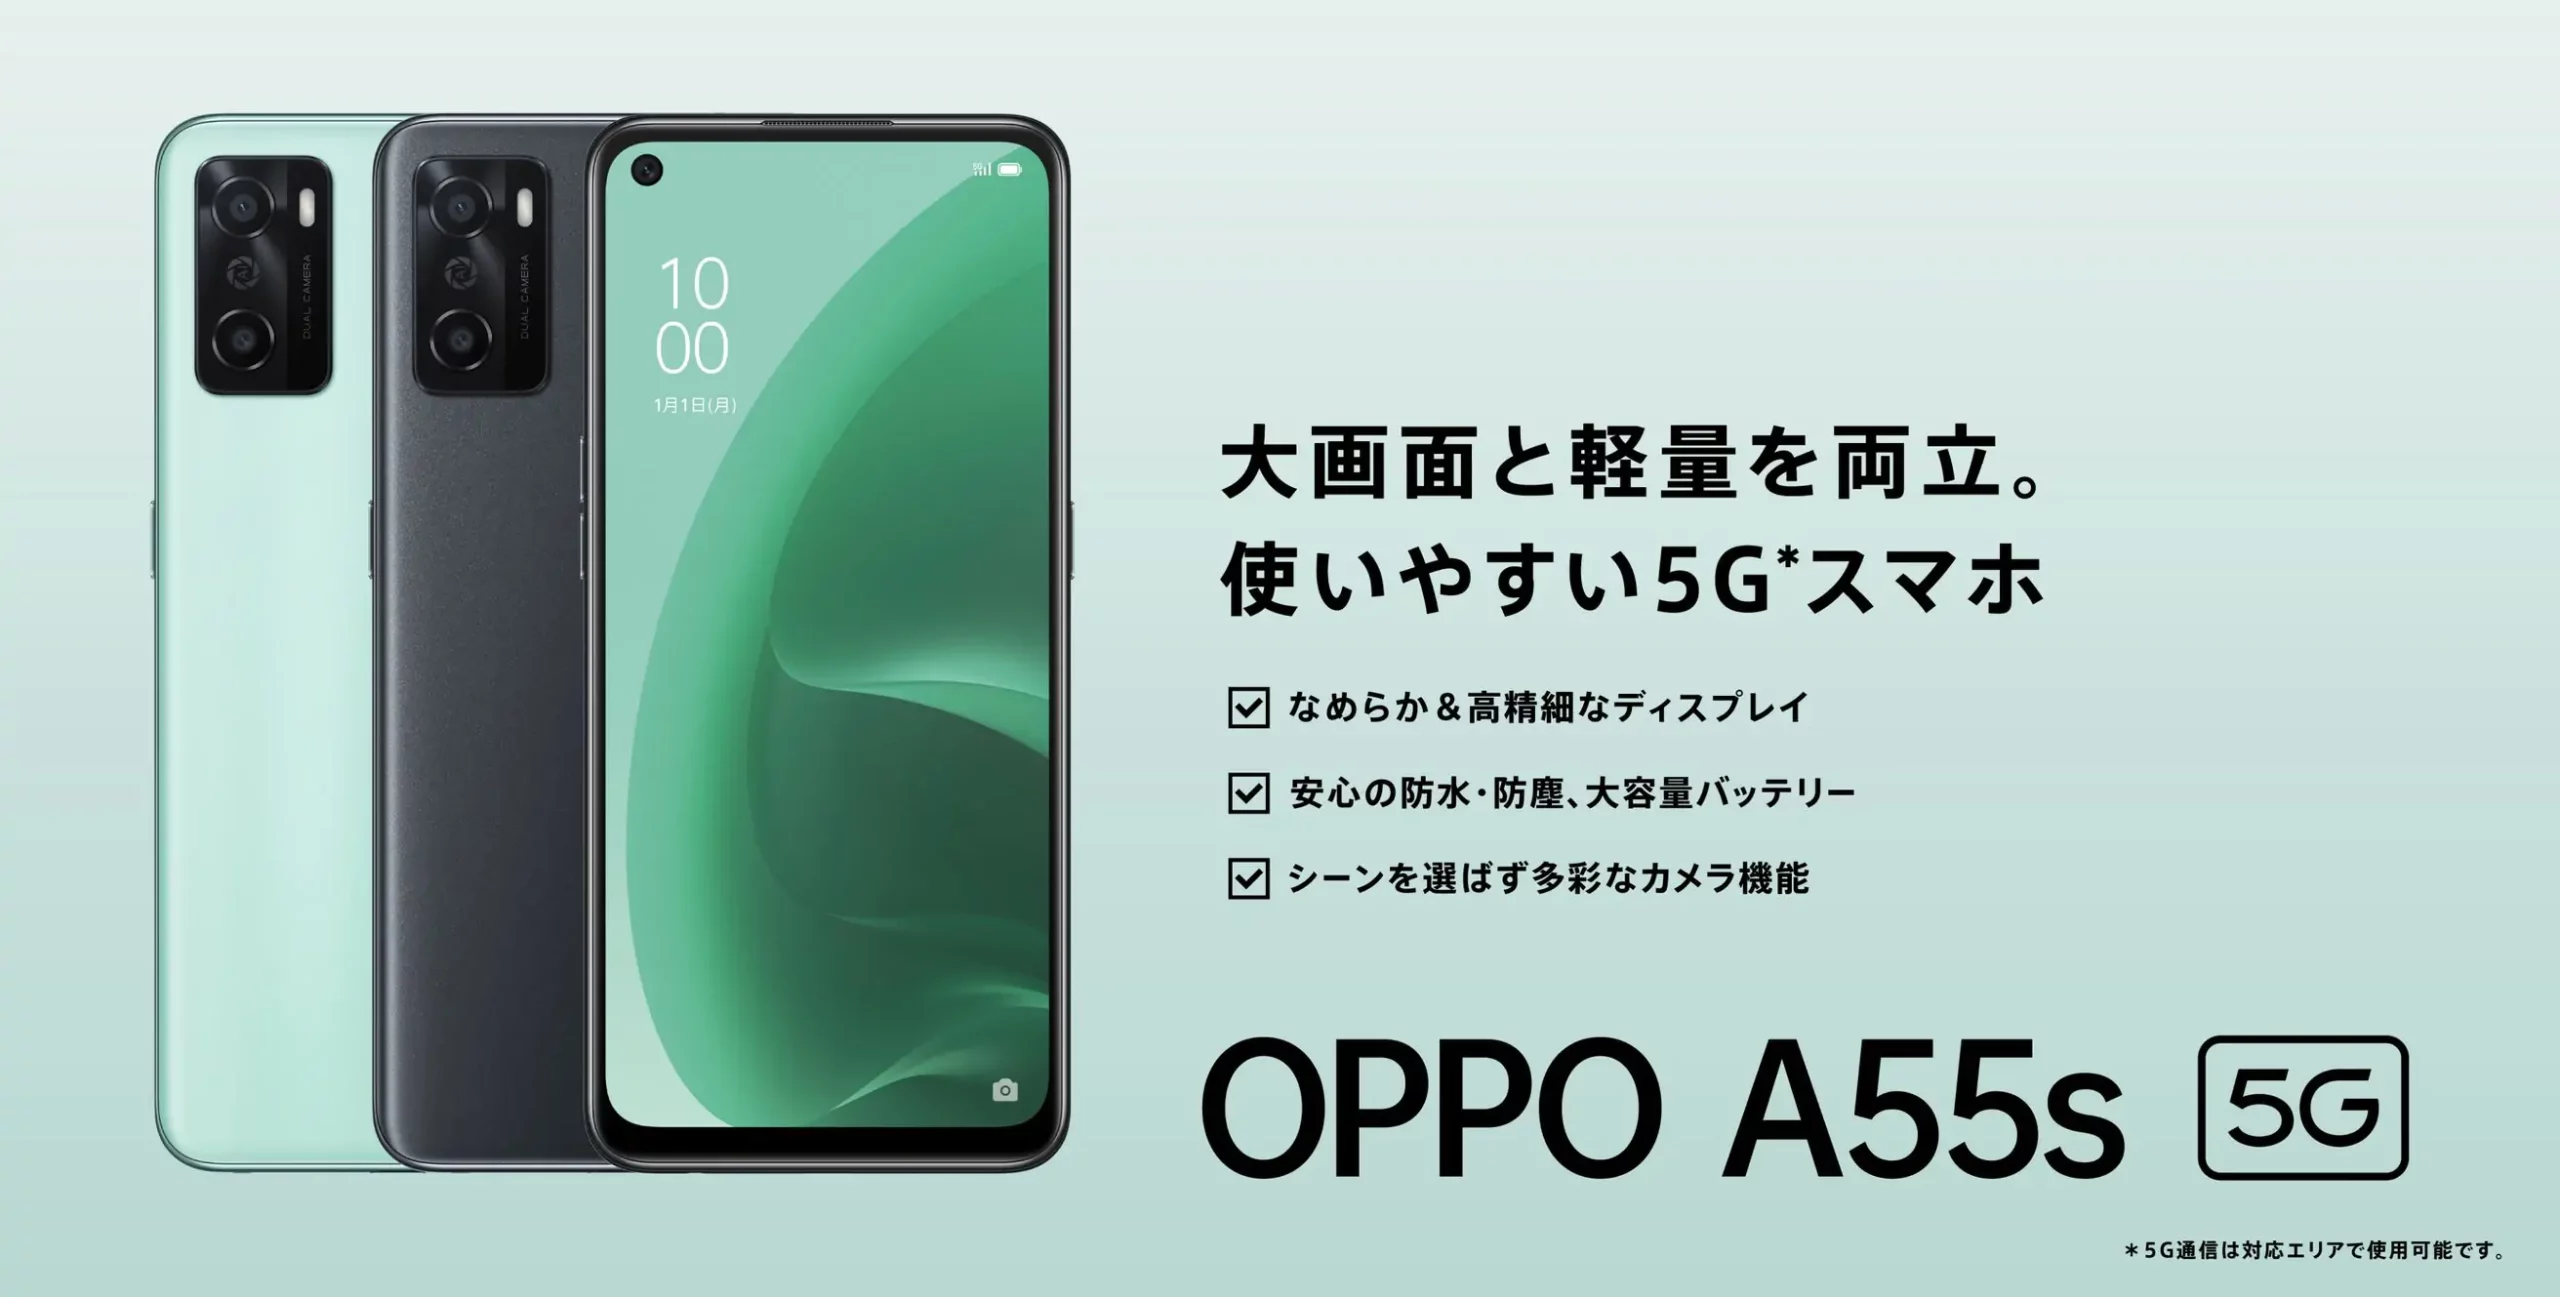 OPPO A55s with Snapdragon CPU and 5G network announced | DroidAfrica